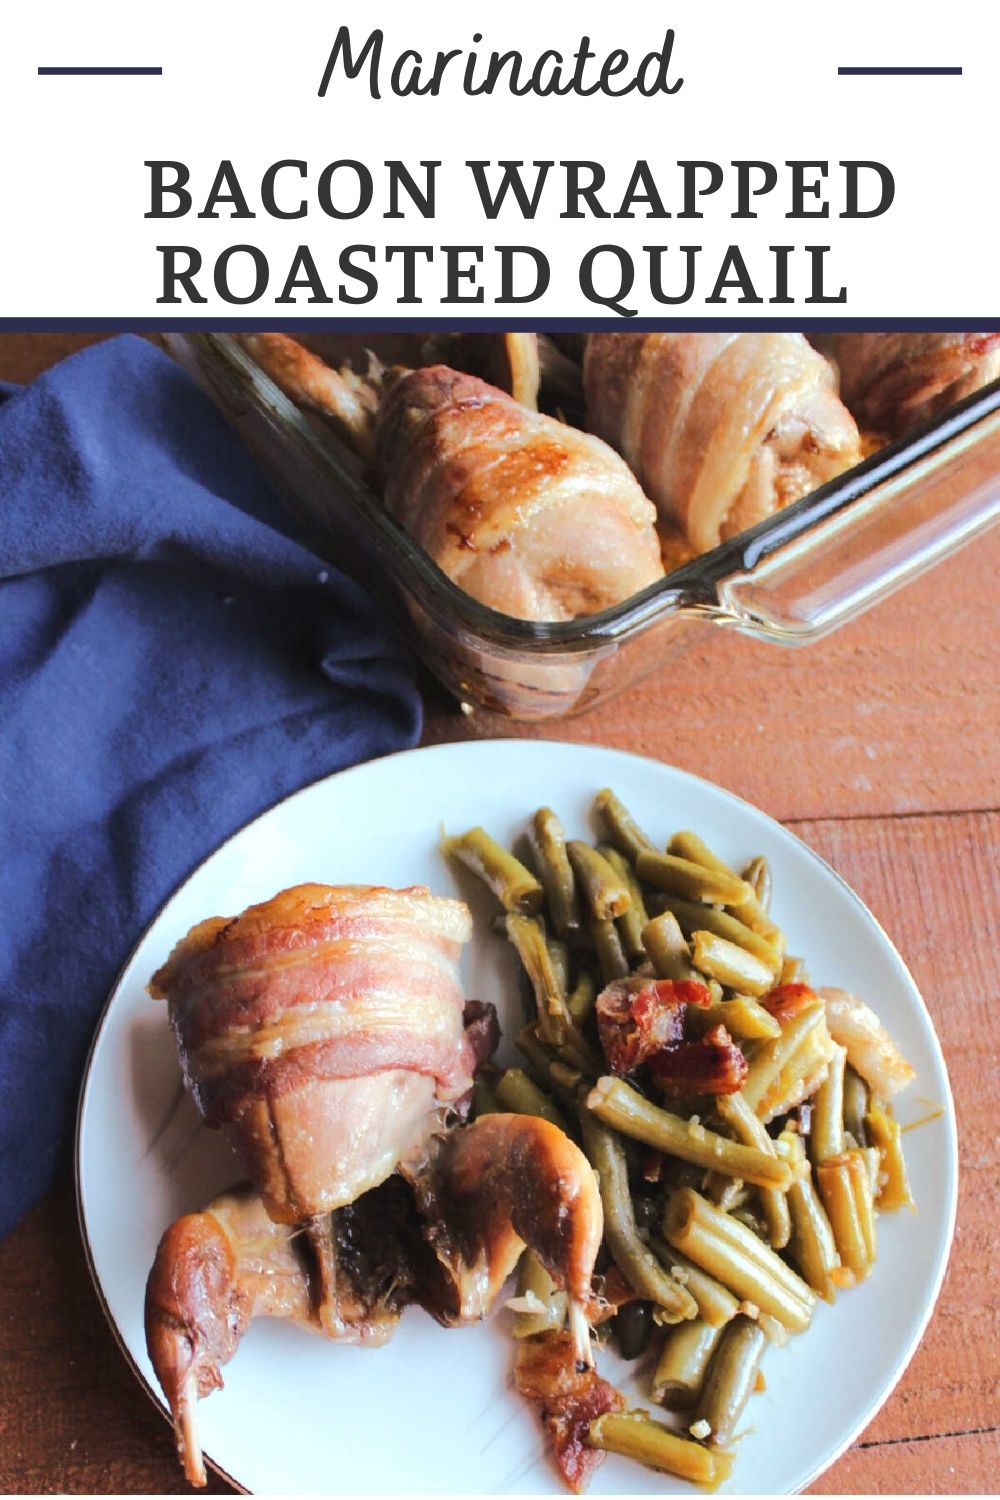 Roasted bacon wrapped quail are first marinated in a flavorful liquid and then wrapped in bacon and baked to perfection. They are sure to be the star of your dinner table.